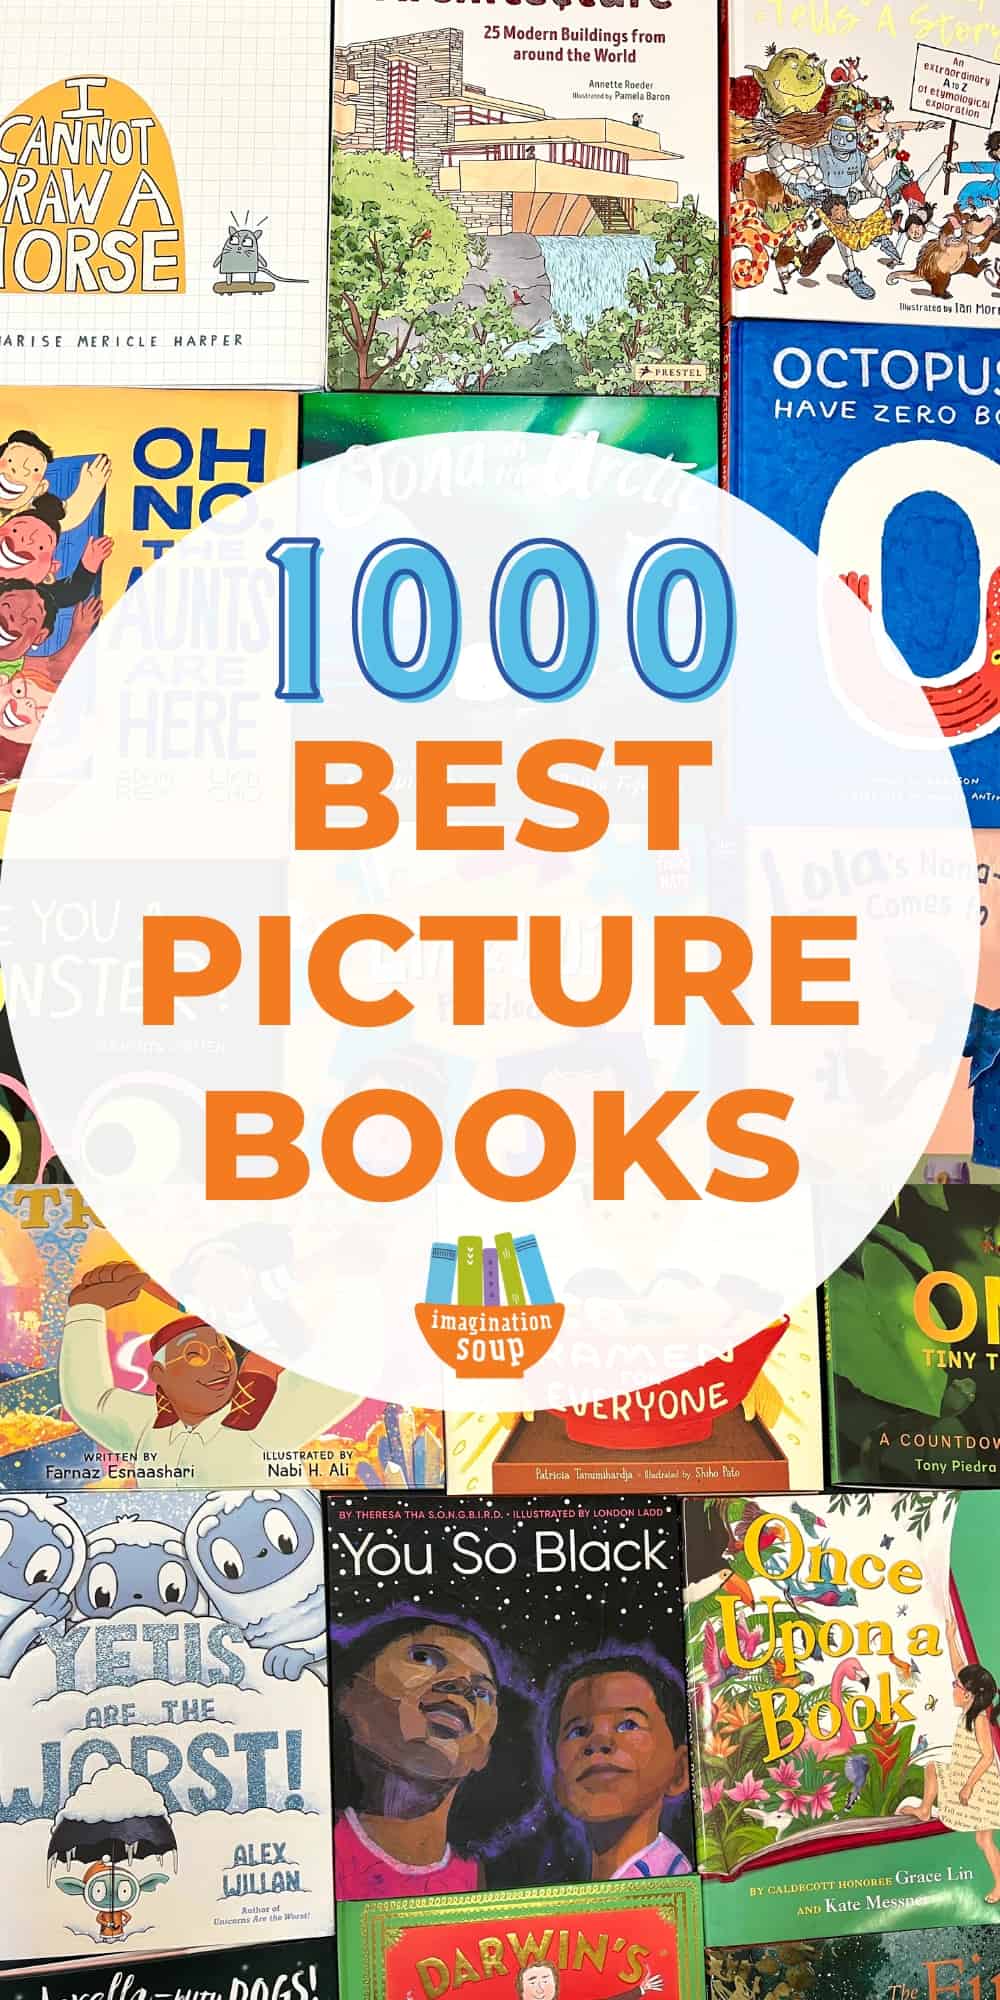 Whether you’re a parent, teacher, librarian, or grandparent, you want to find the best children’s picture books to read aloud and share with children.